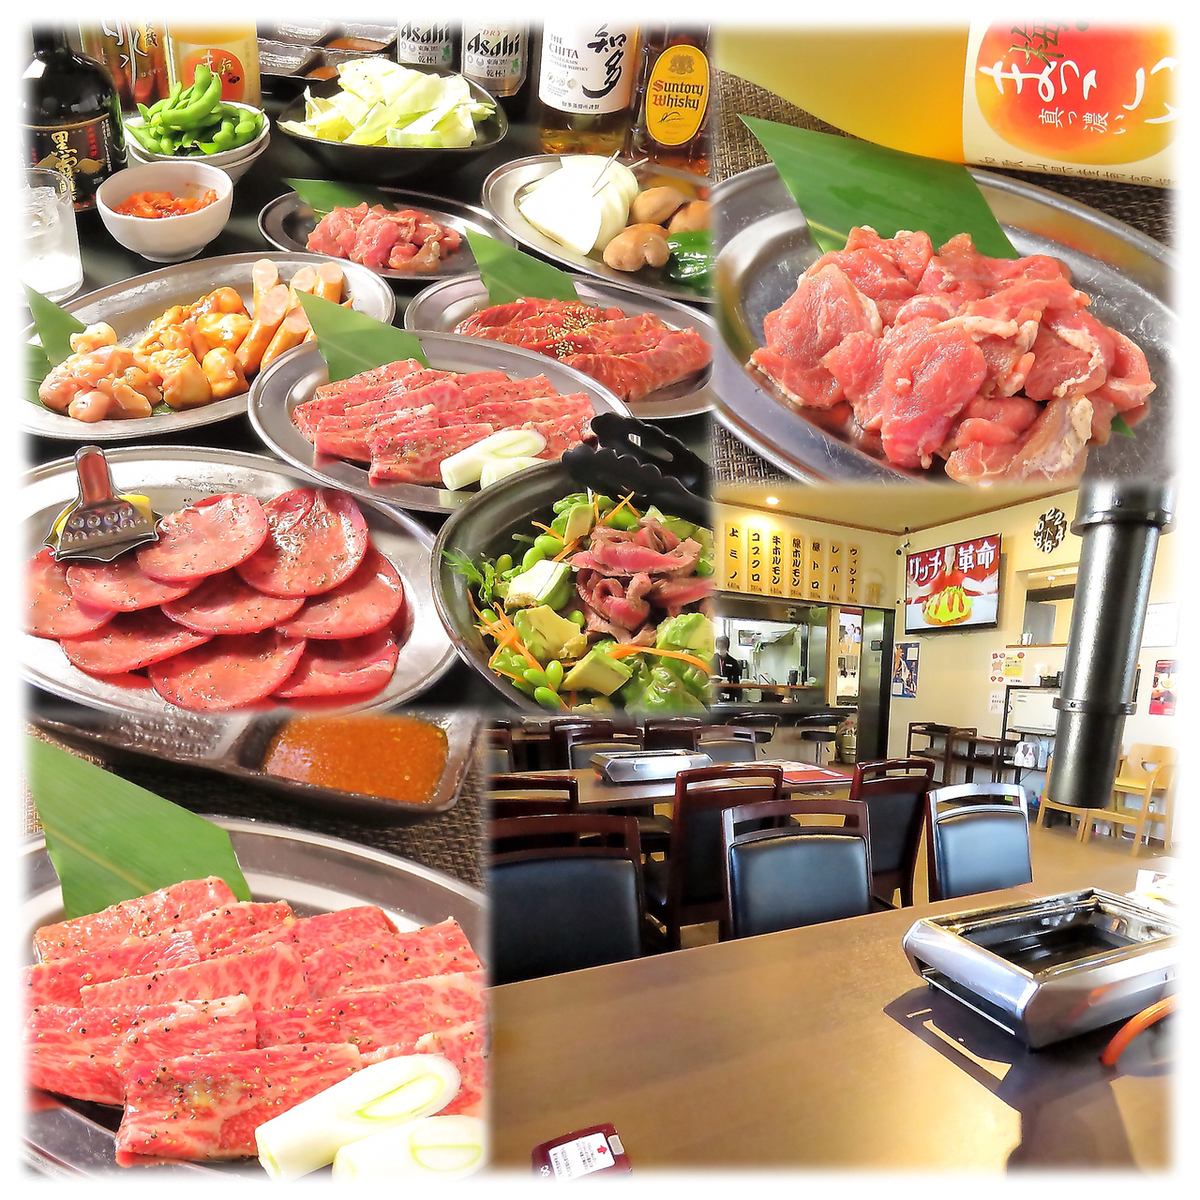 ≪Open until midnight! ≫ You can enjoy fresh and rare roasted meats ★